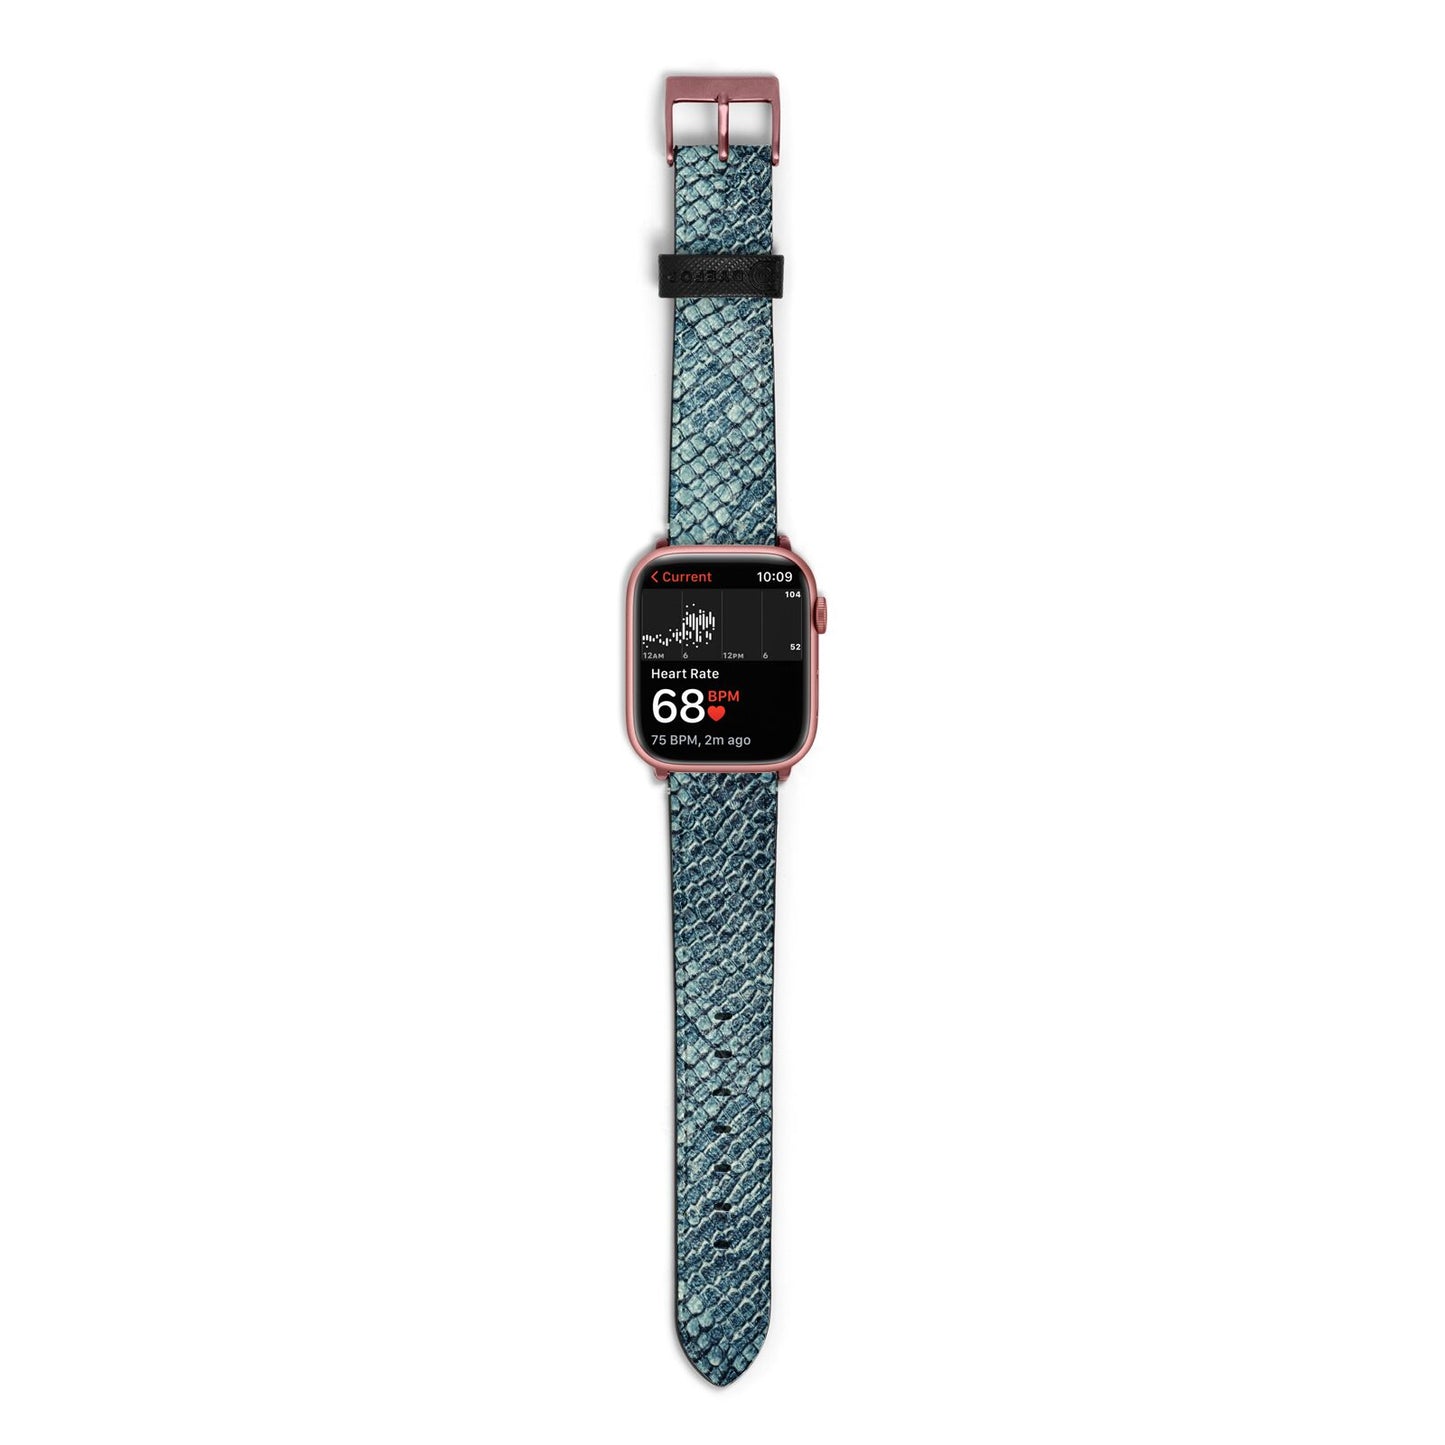 Teal Snakeskin Apple Watch Strap Size 38mm with Rose Gold Hardware